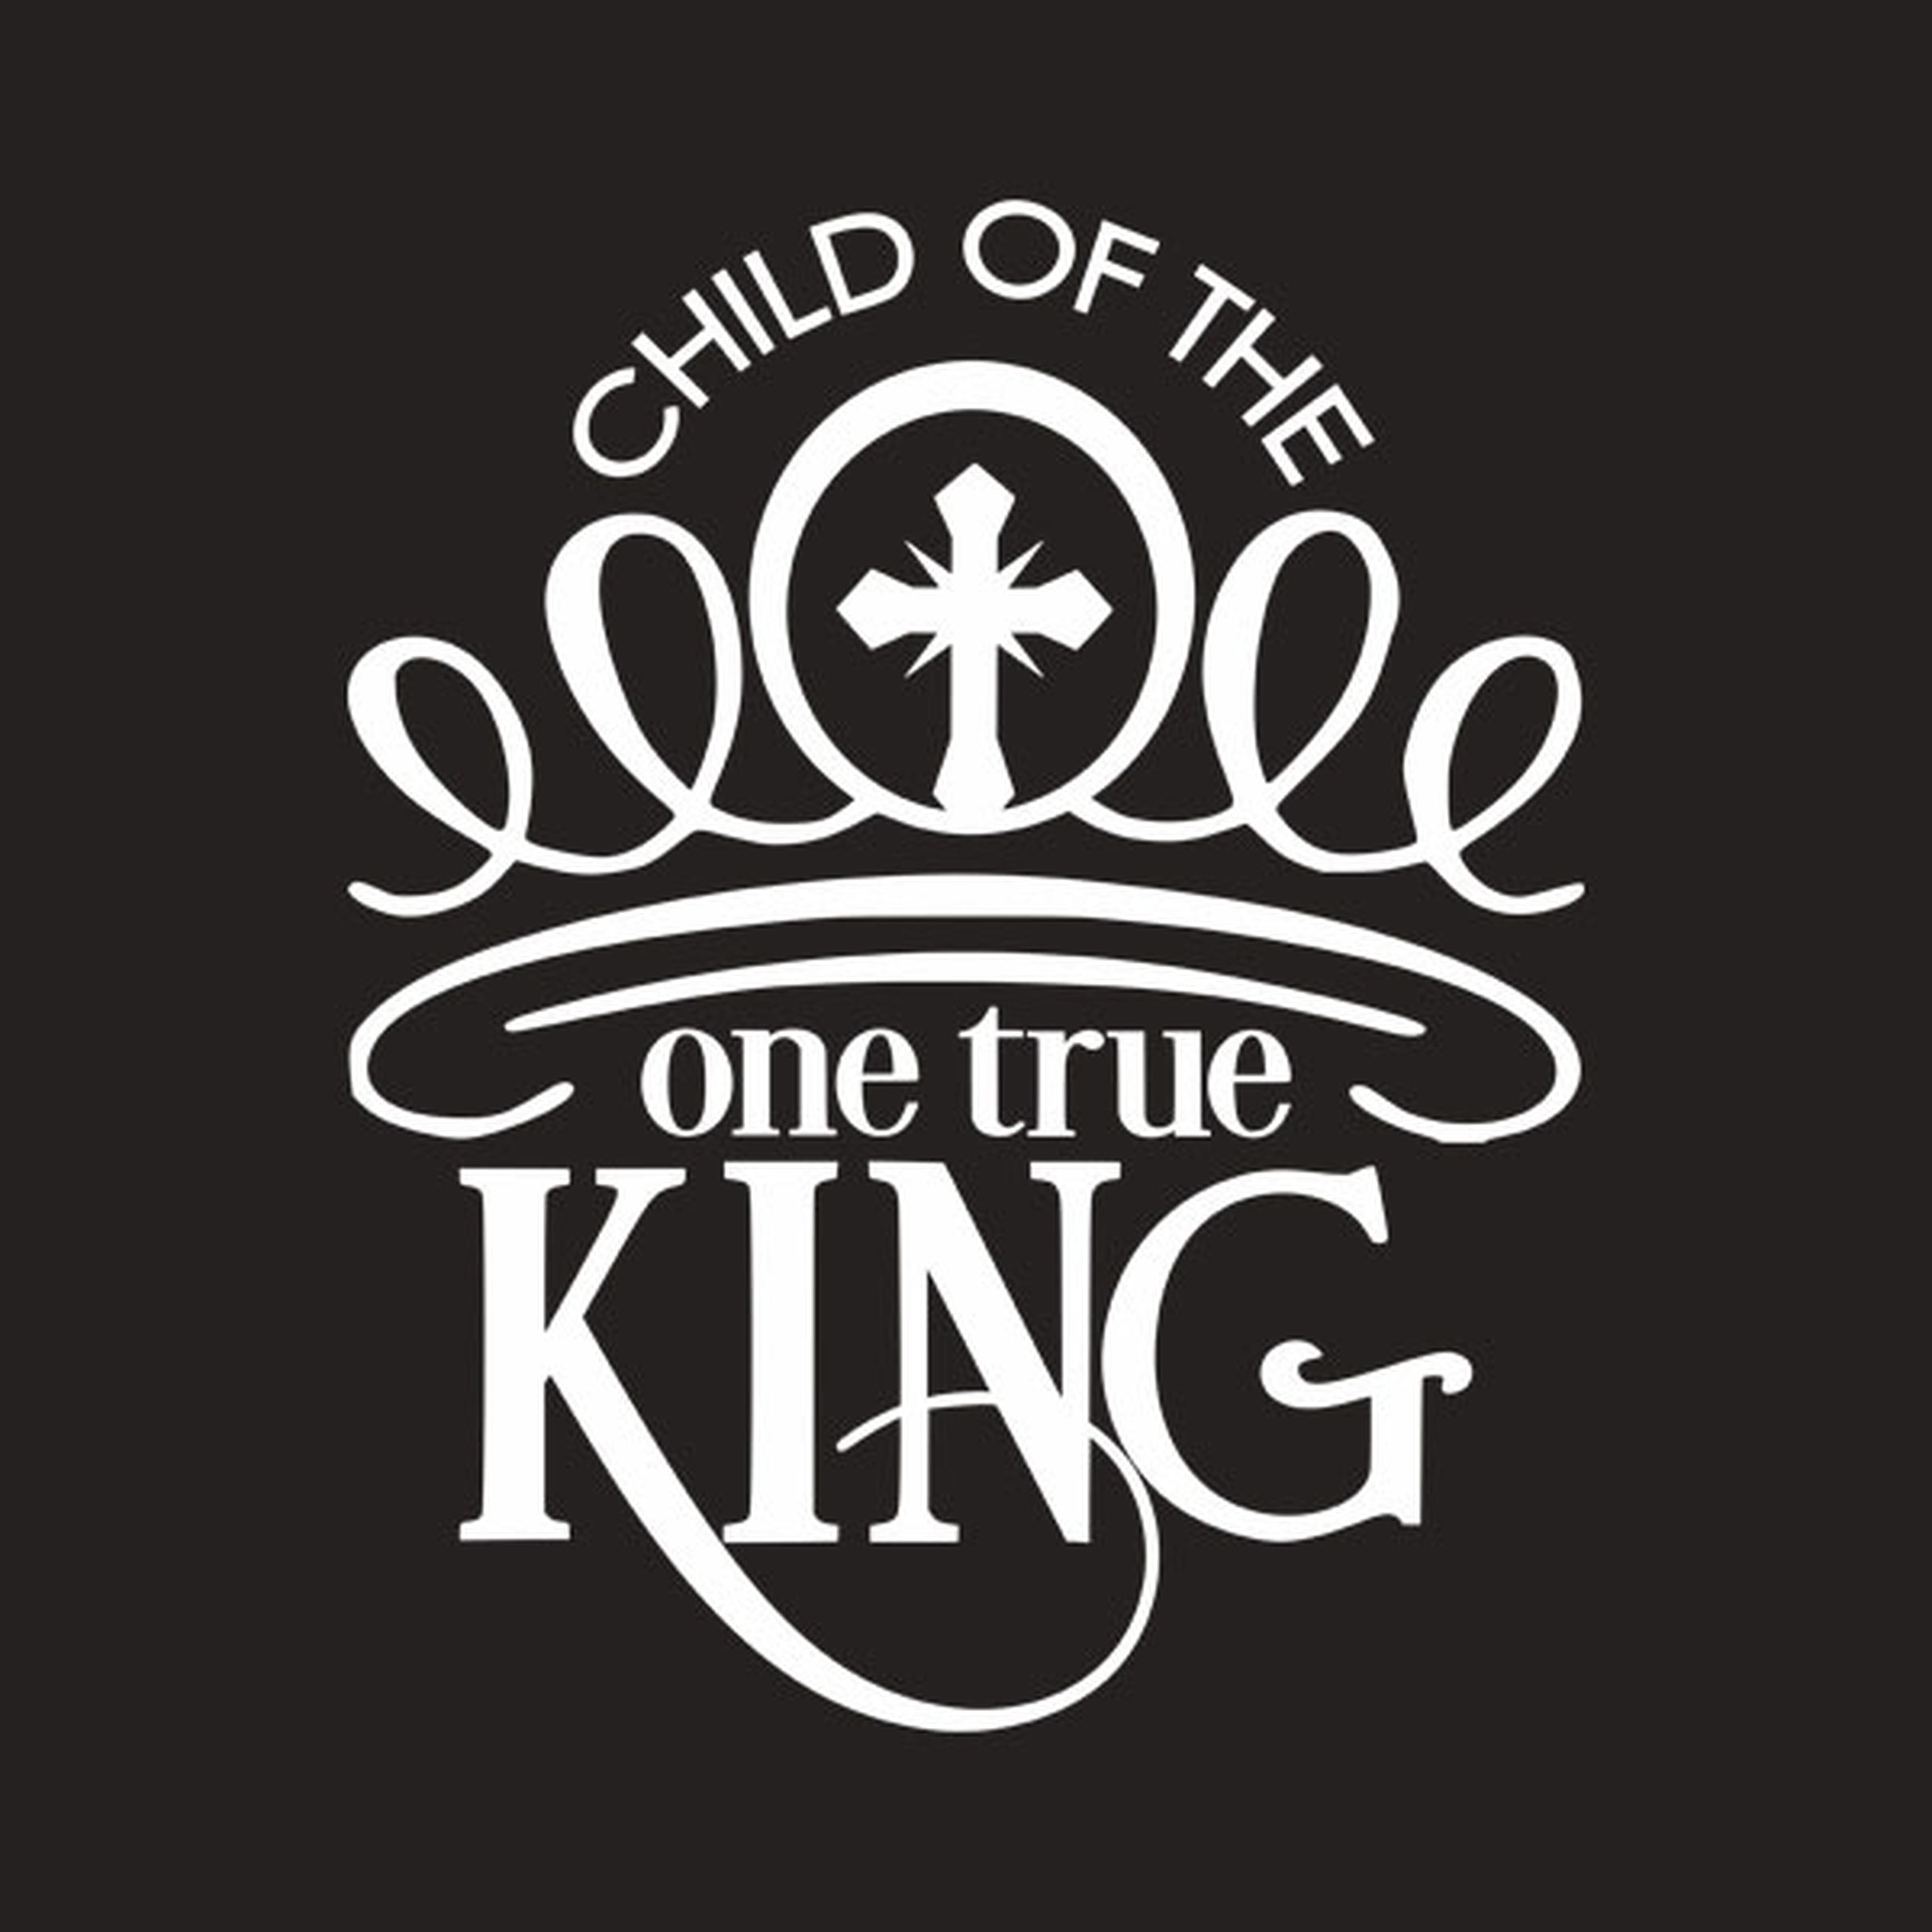 Child of One Real King T-shirt